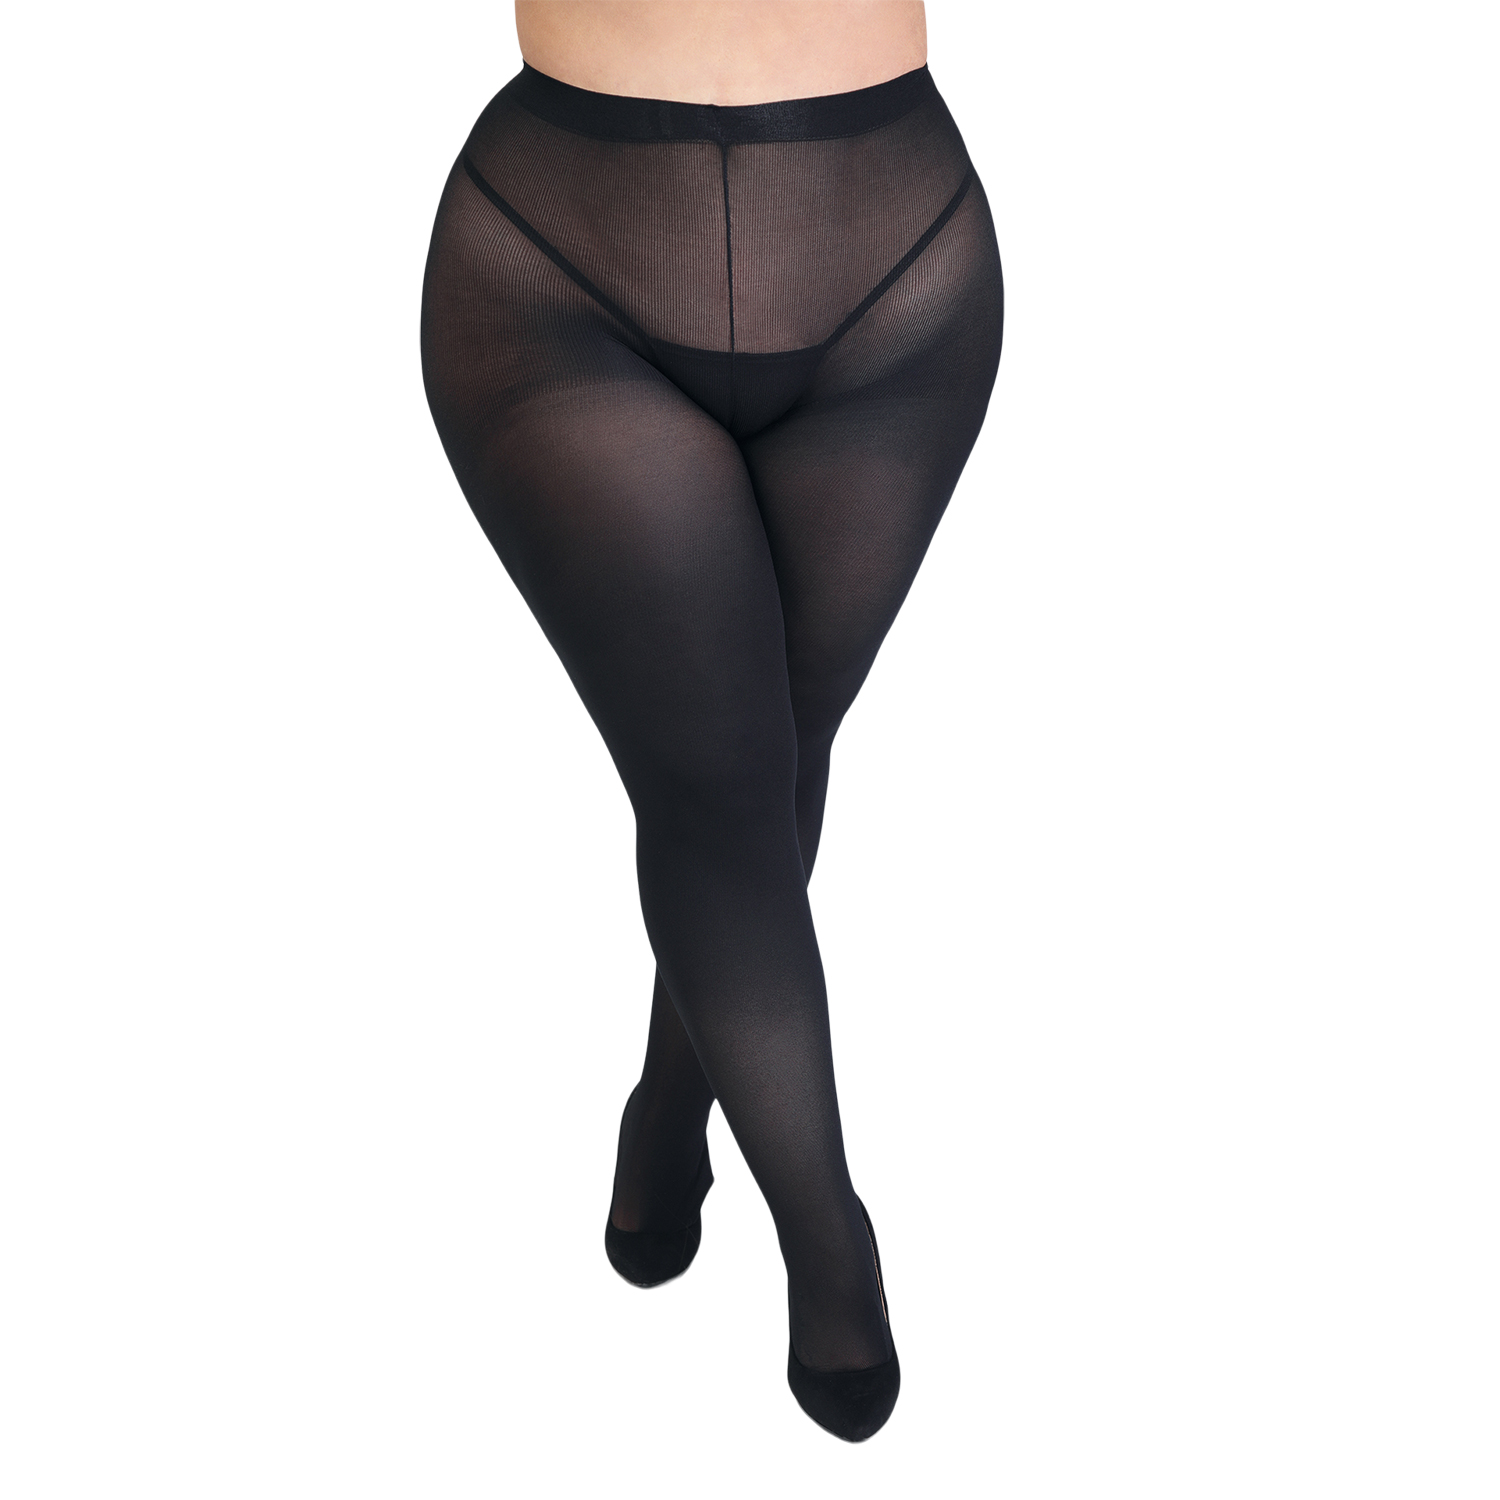 Fifty Shades Of Grey Captivate Plus Size Spanking Tights